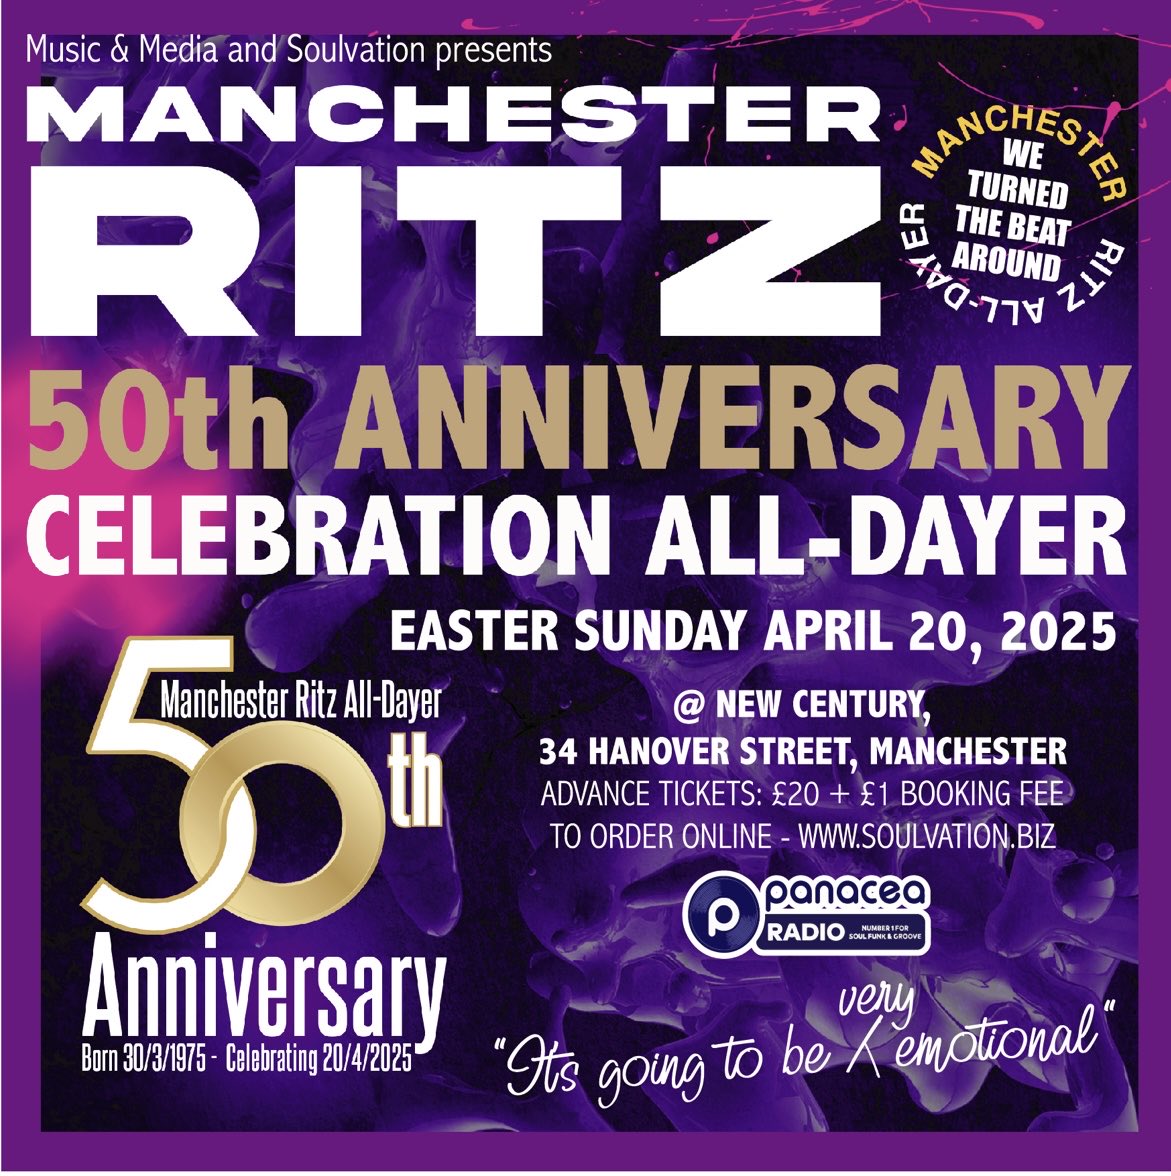 Another brilliant all-dayer is on the way - the tops in Jazz Funk/Soul & Disco memories plus much more! In two rooms! At the wonderful venue ⁦@NCHMCR⁩ 34 Hanover St Manchester- all taking place on Easter Monday April 20th 2025. Tickets £20 +£1fee soulvation.biz